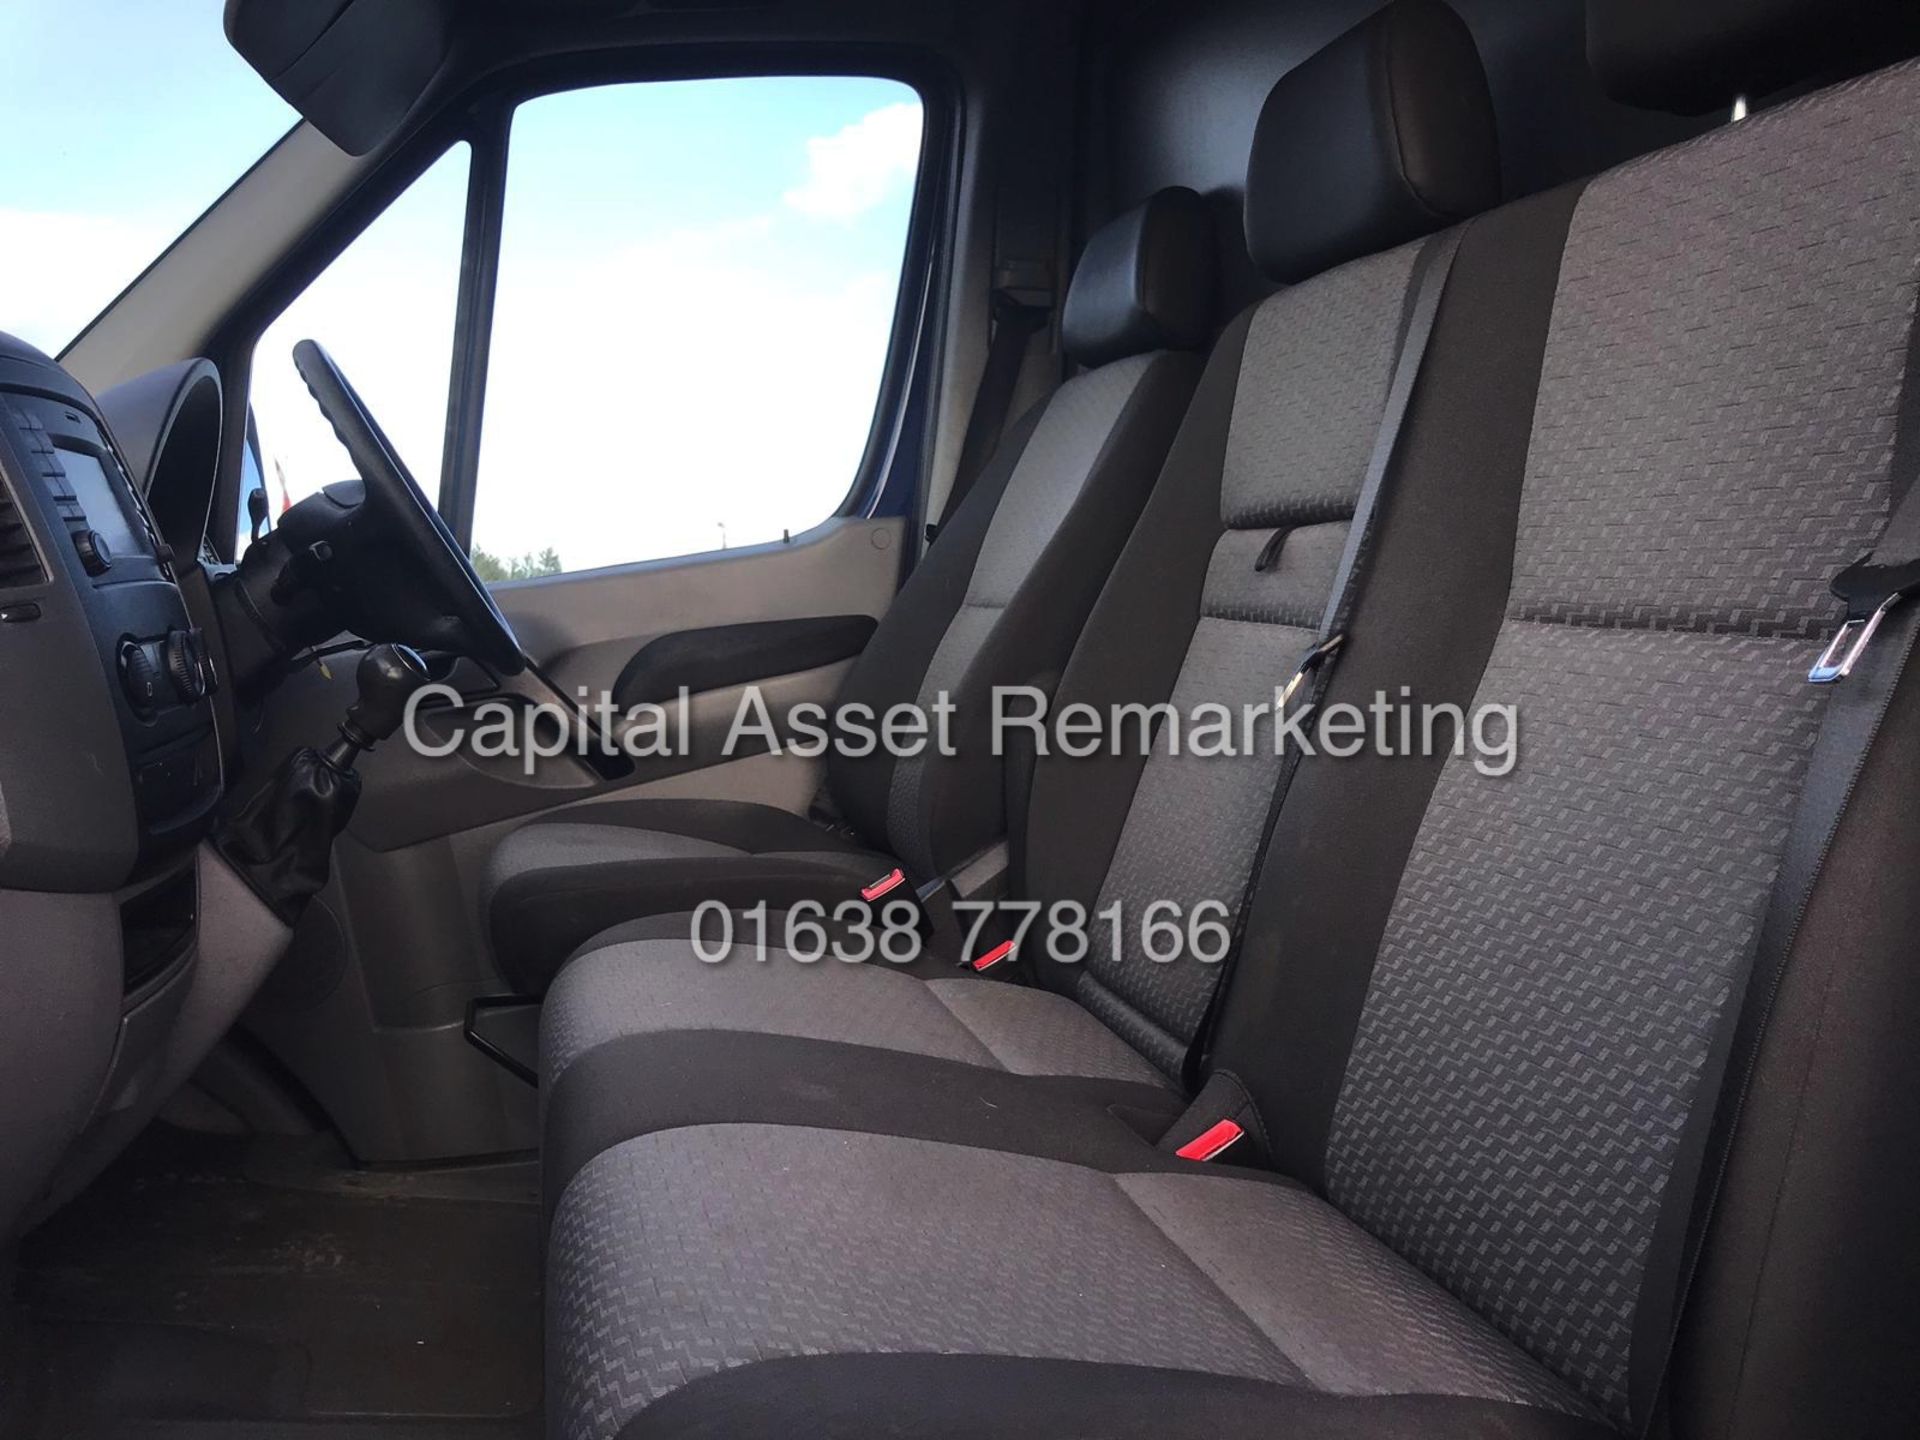 (ON SALE) VOLKSWAGEN CRAFTER 2.0TDI CR30 (2015 MODEL) AIR CON - ELECTRIC PACK - Image 9 of 12